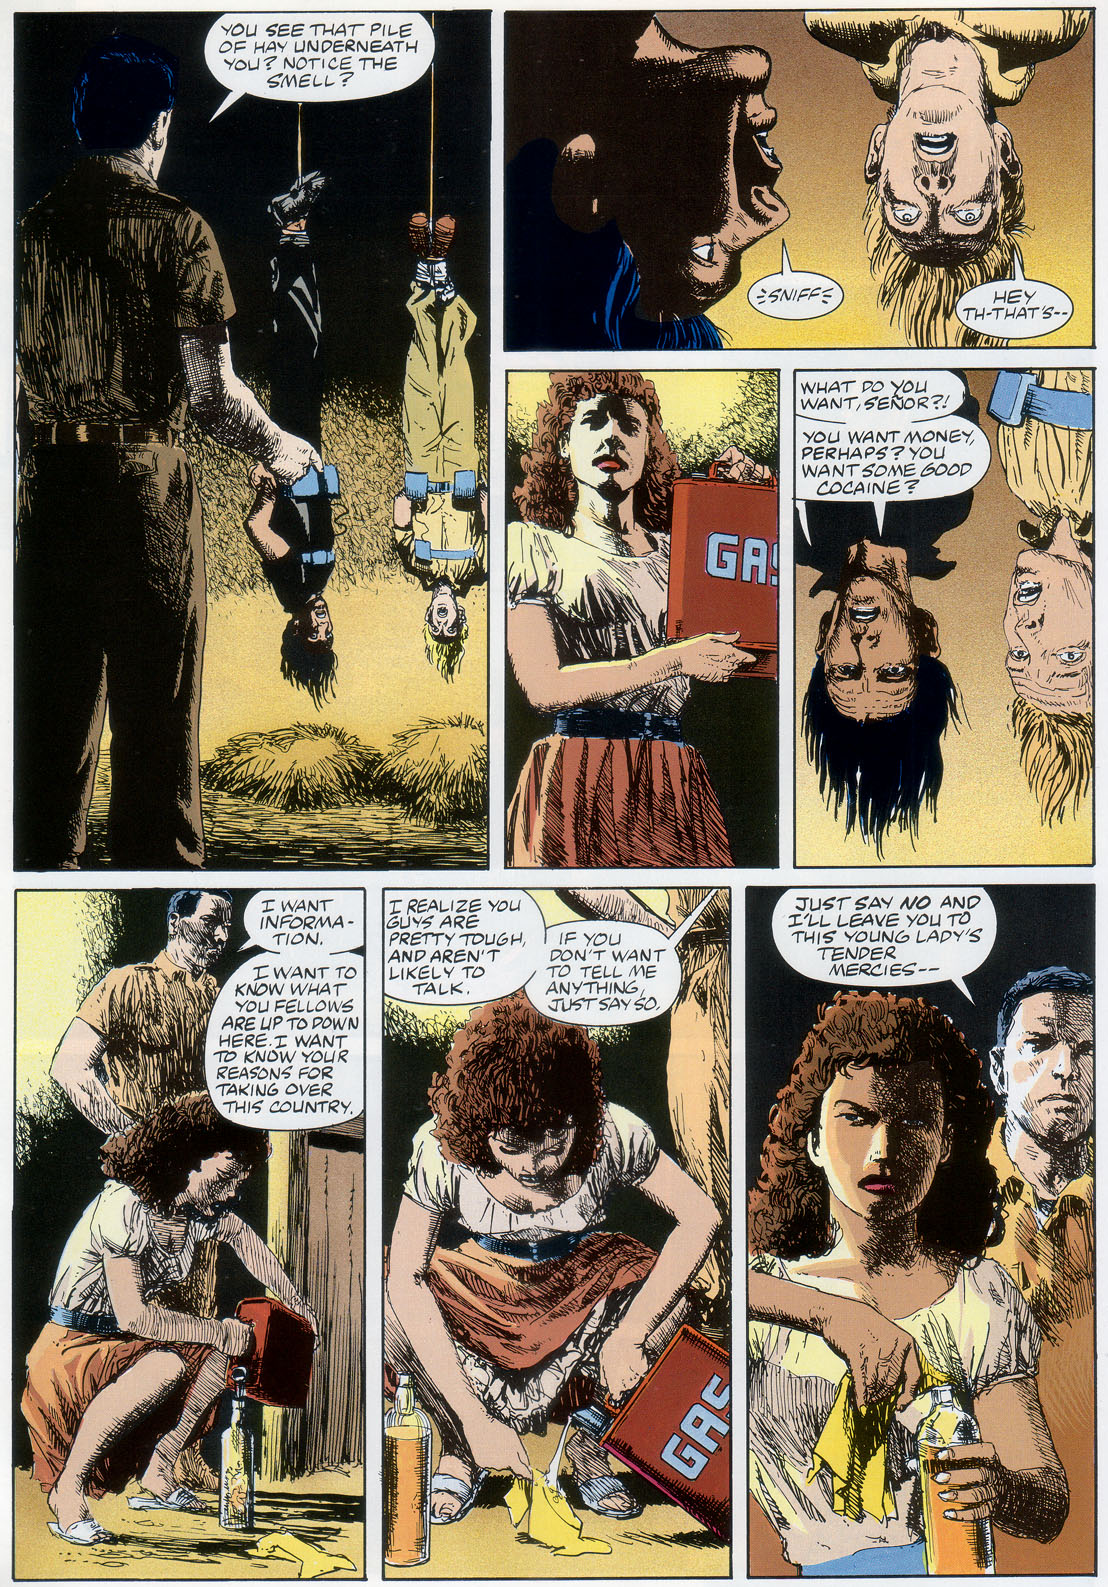 Marvel Graphic Novel issue 57 - Rick Mason - The Agent - Page 42